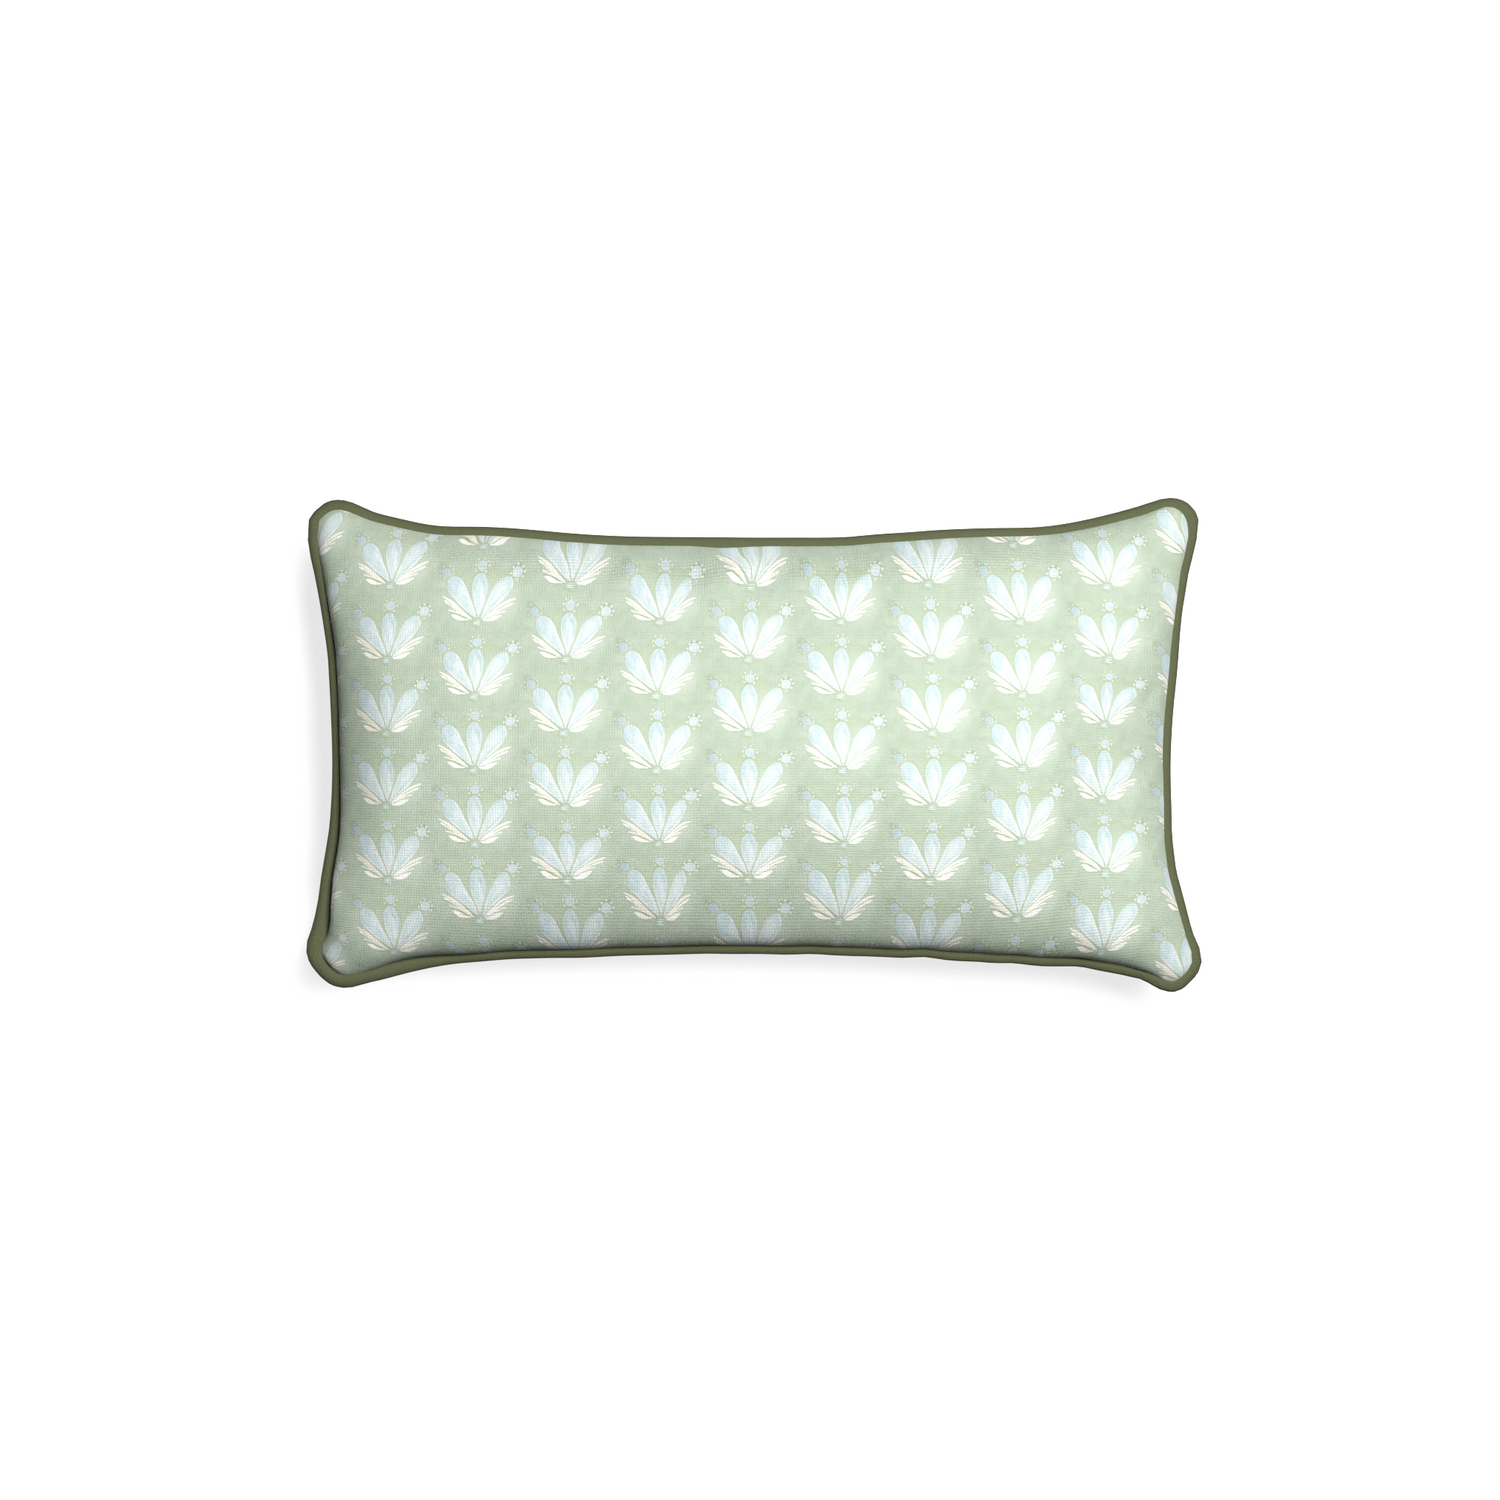 Petite-lumbar serena sea salt custom blue & green floral drop repeatpillow with f piping on white background